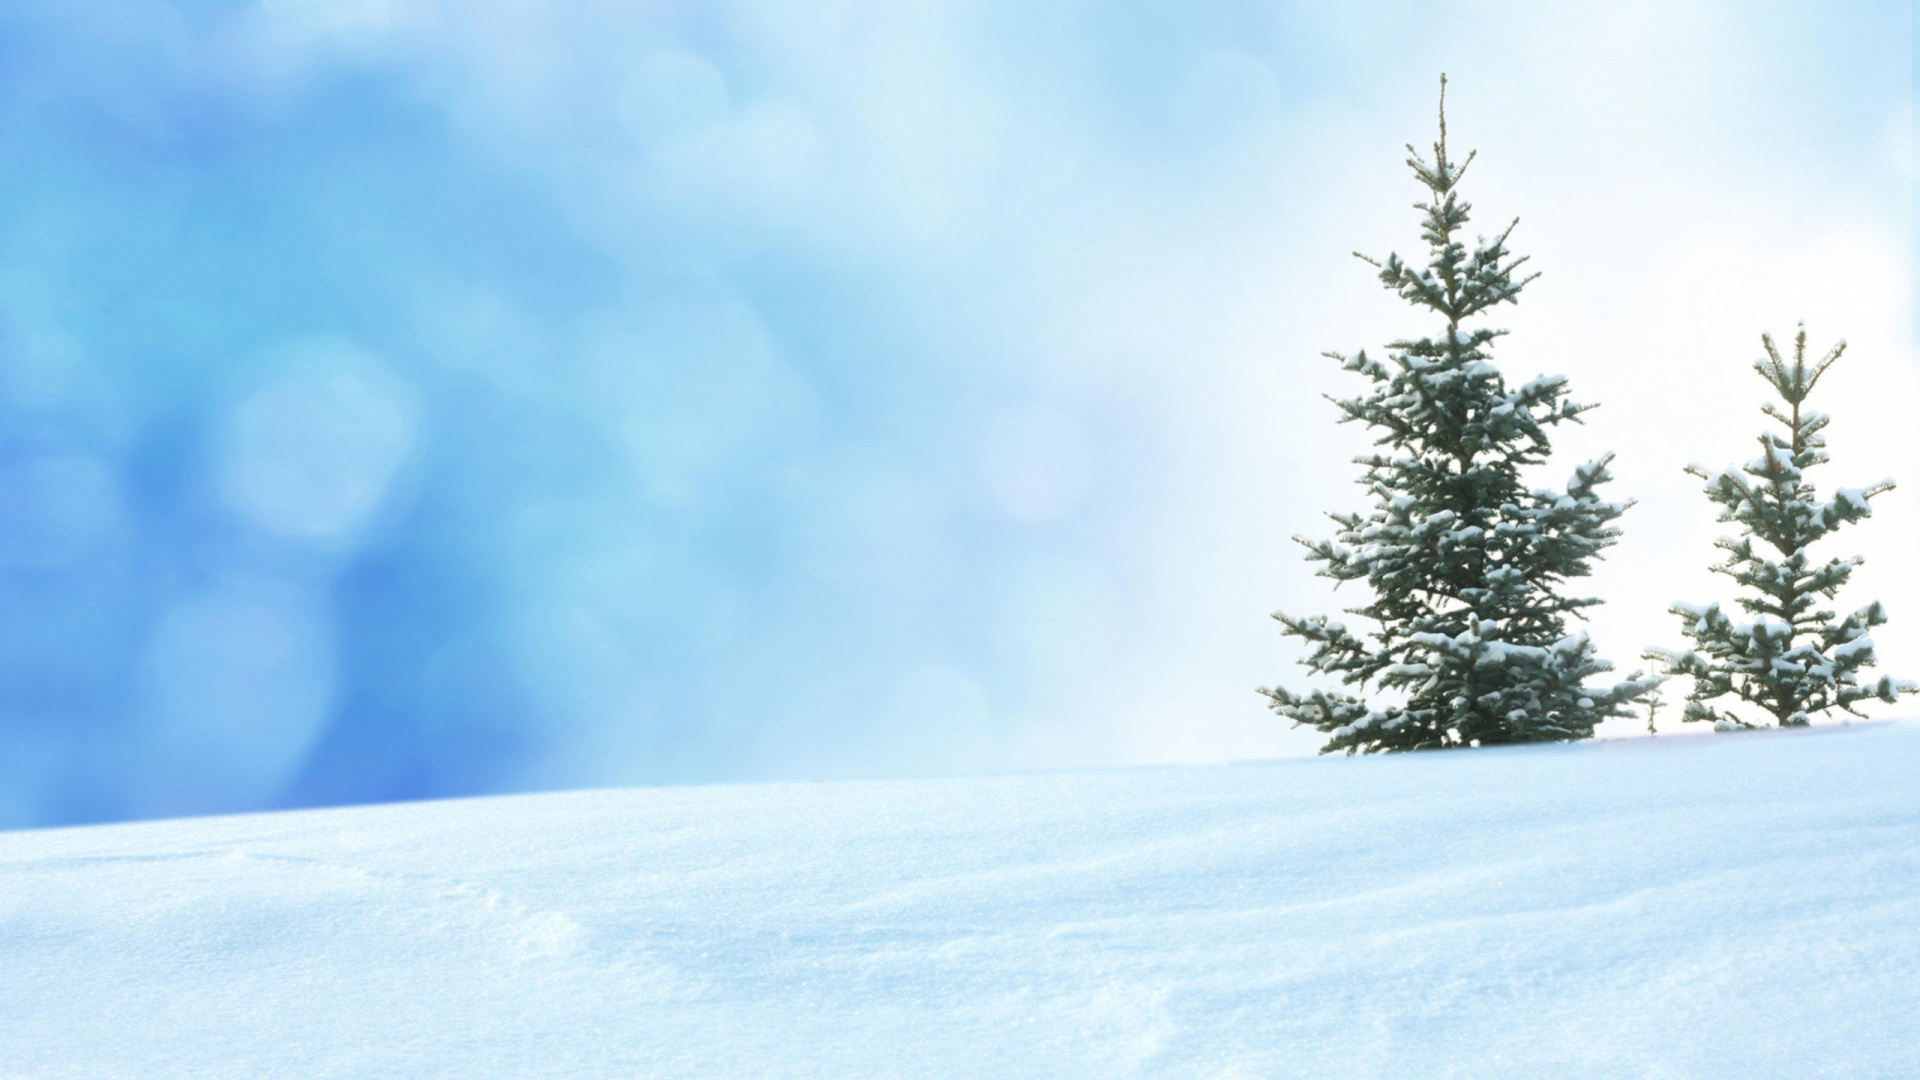 Green Pine Tree Covered With Snow. Wallpaper in 1920x1080 Resolution